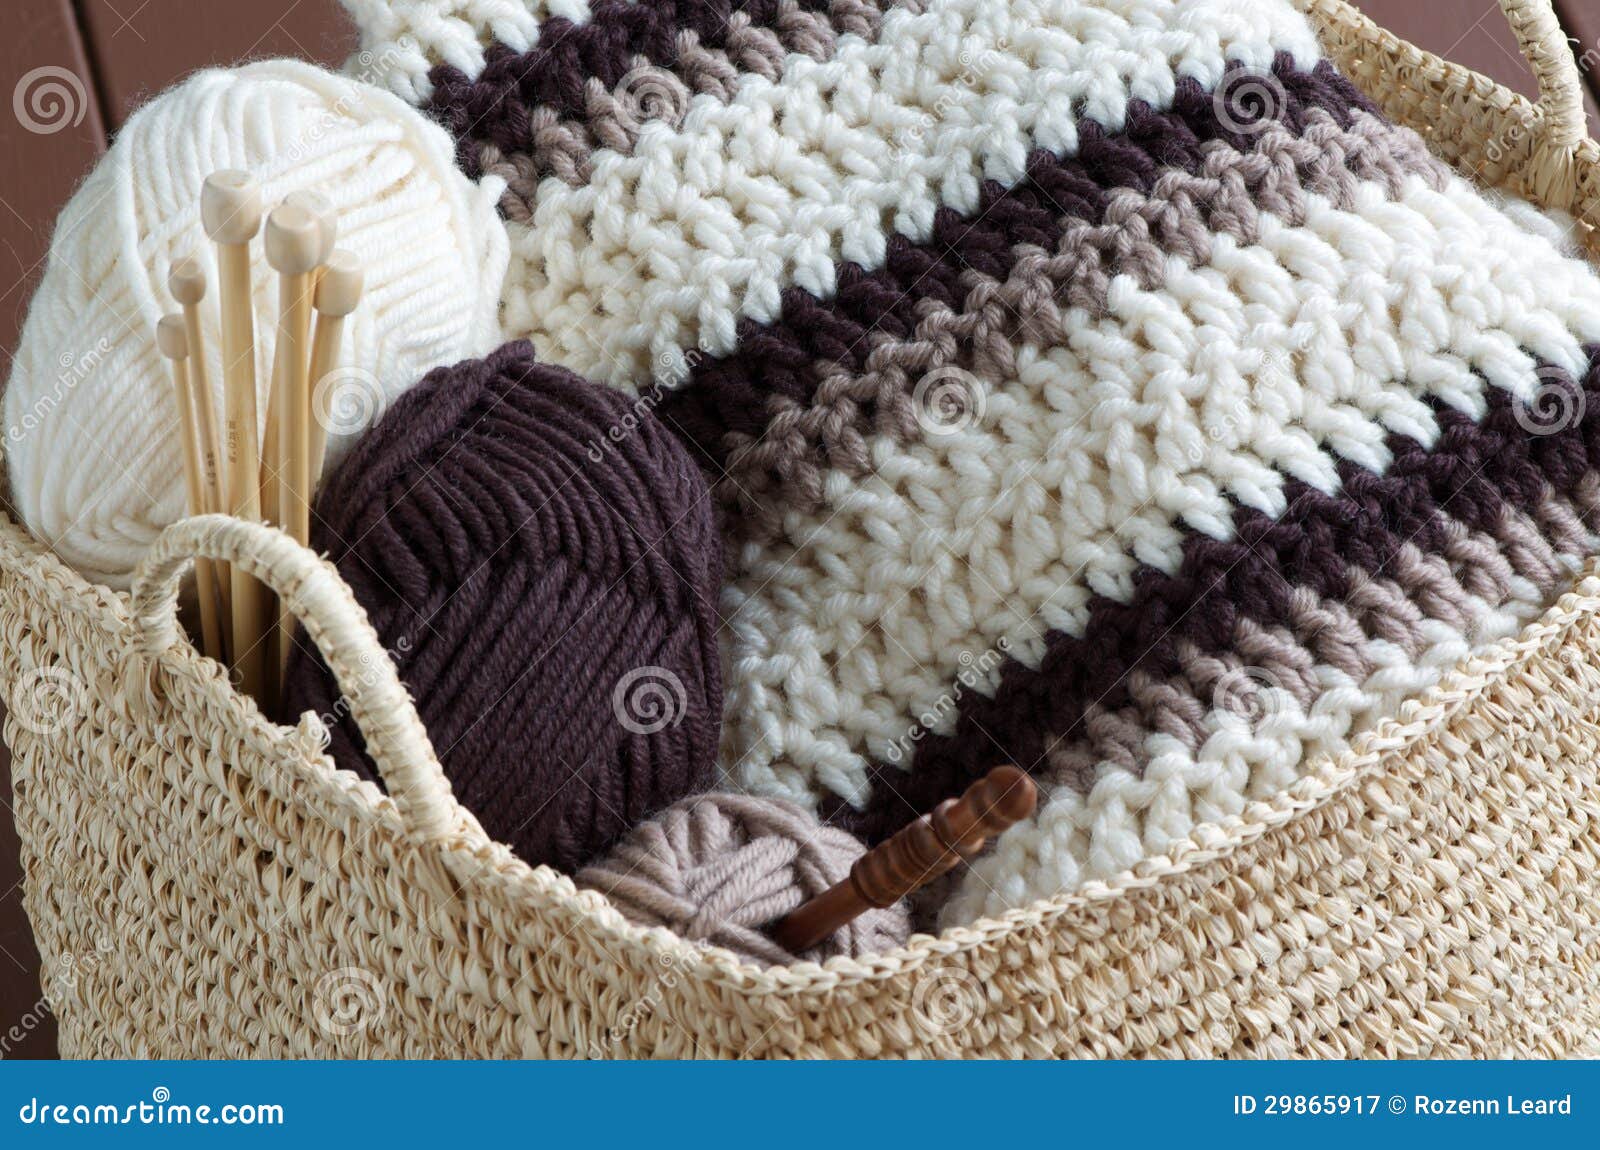 Knitting. Wicker basket with colored balls of wool yarn and crochet hooks  on wooden background. Stock Photo